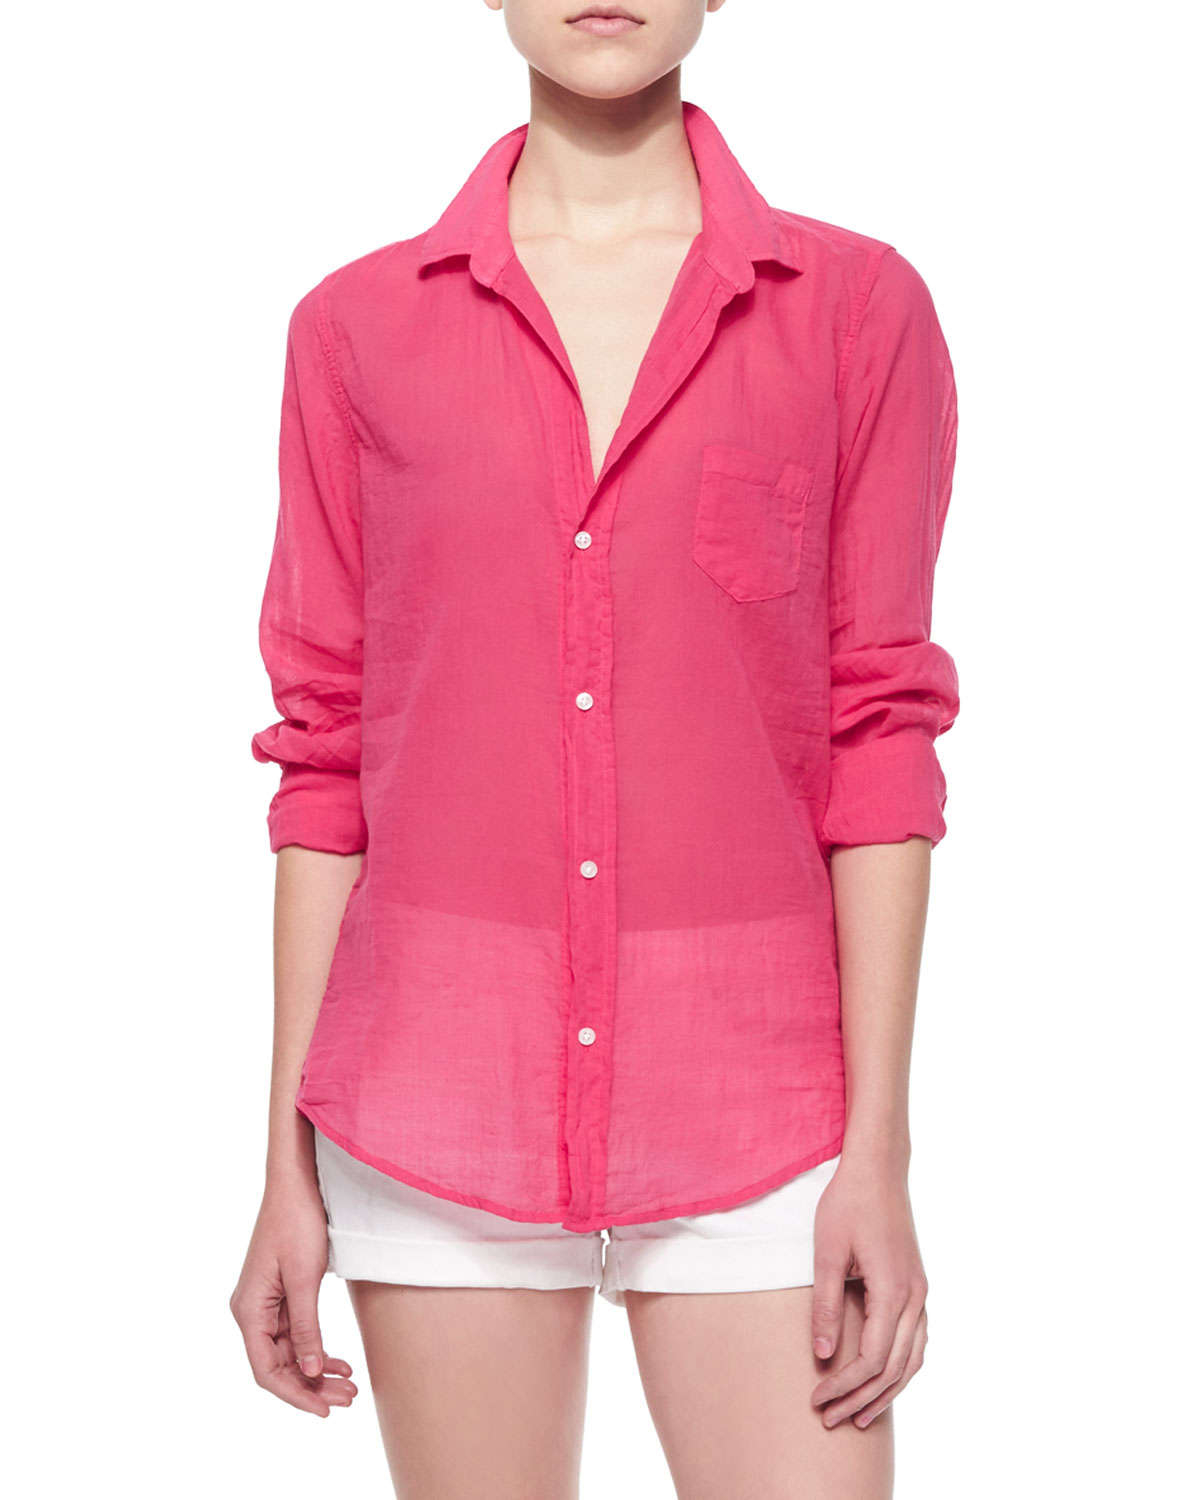 Frank & eileen Barry Long-Sleeve Voile Shirt in Red | Lyst